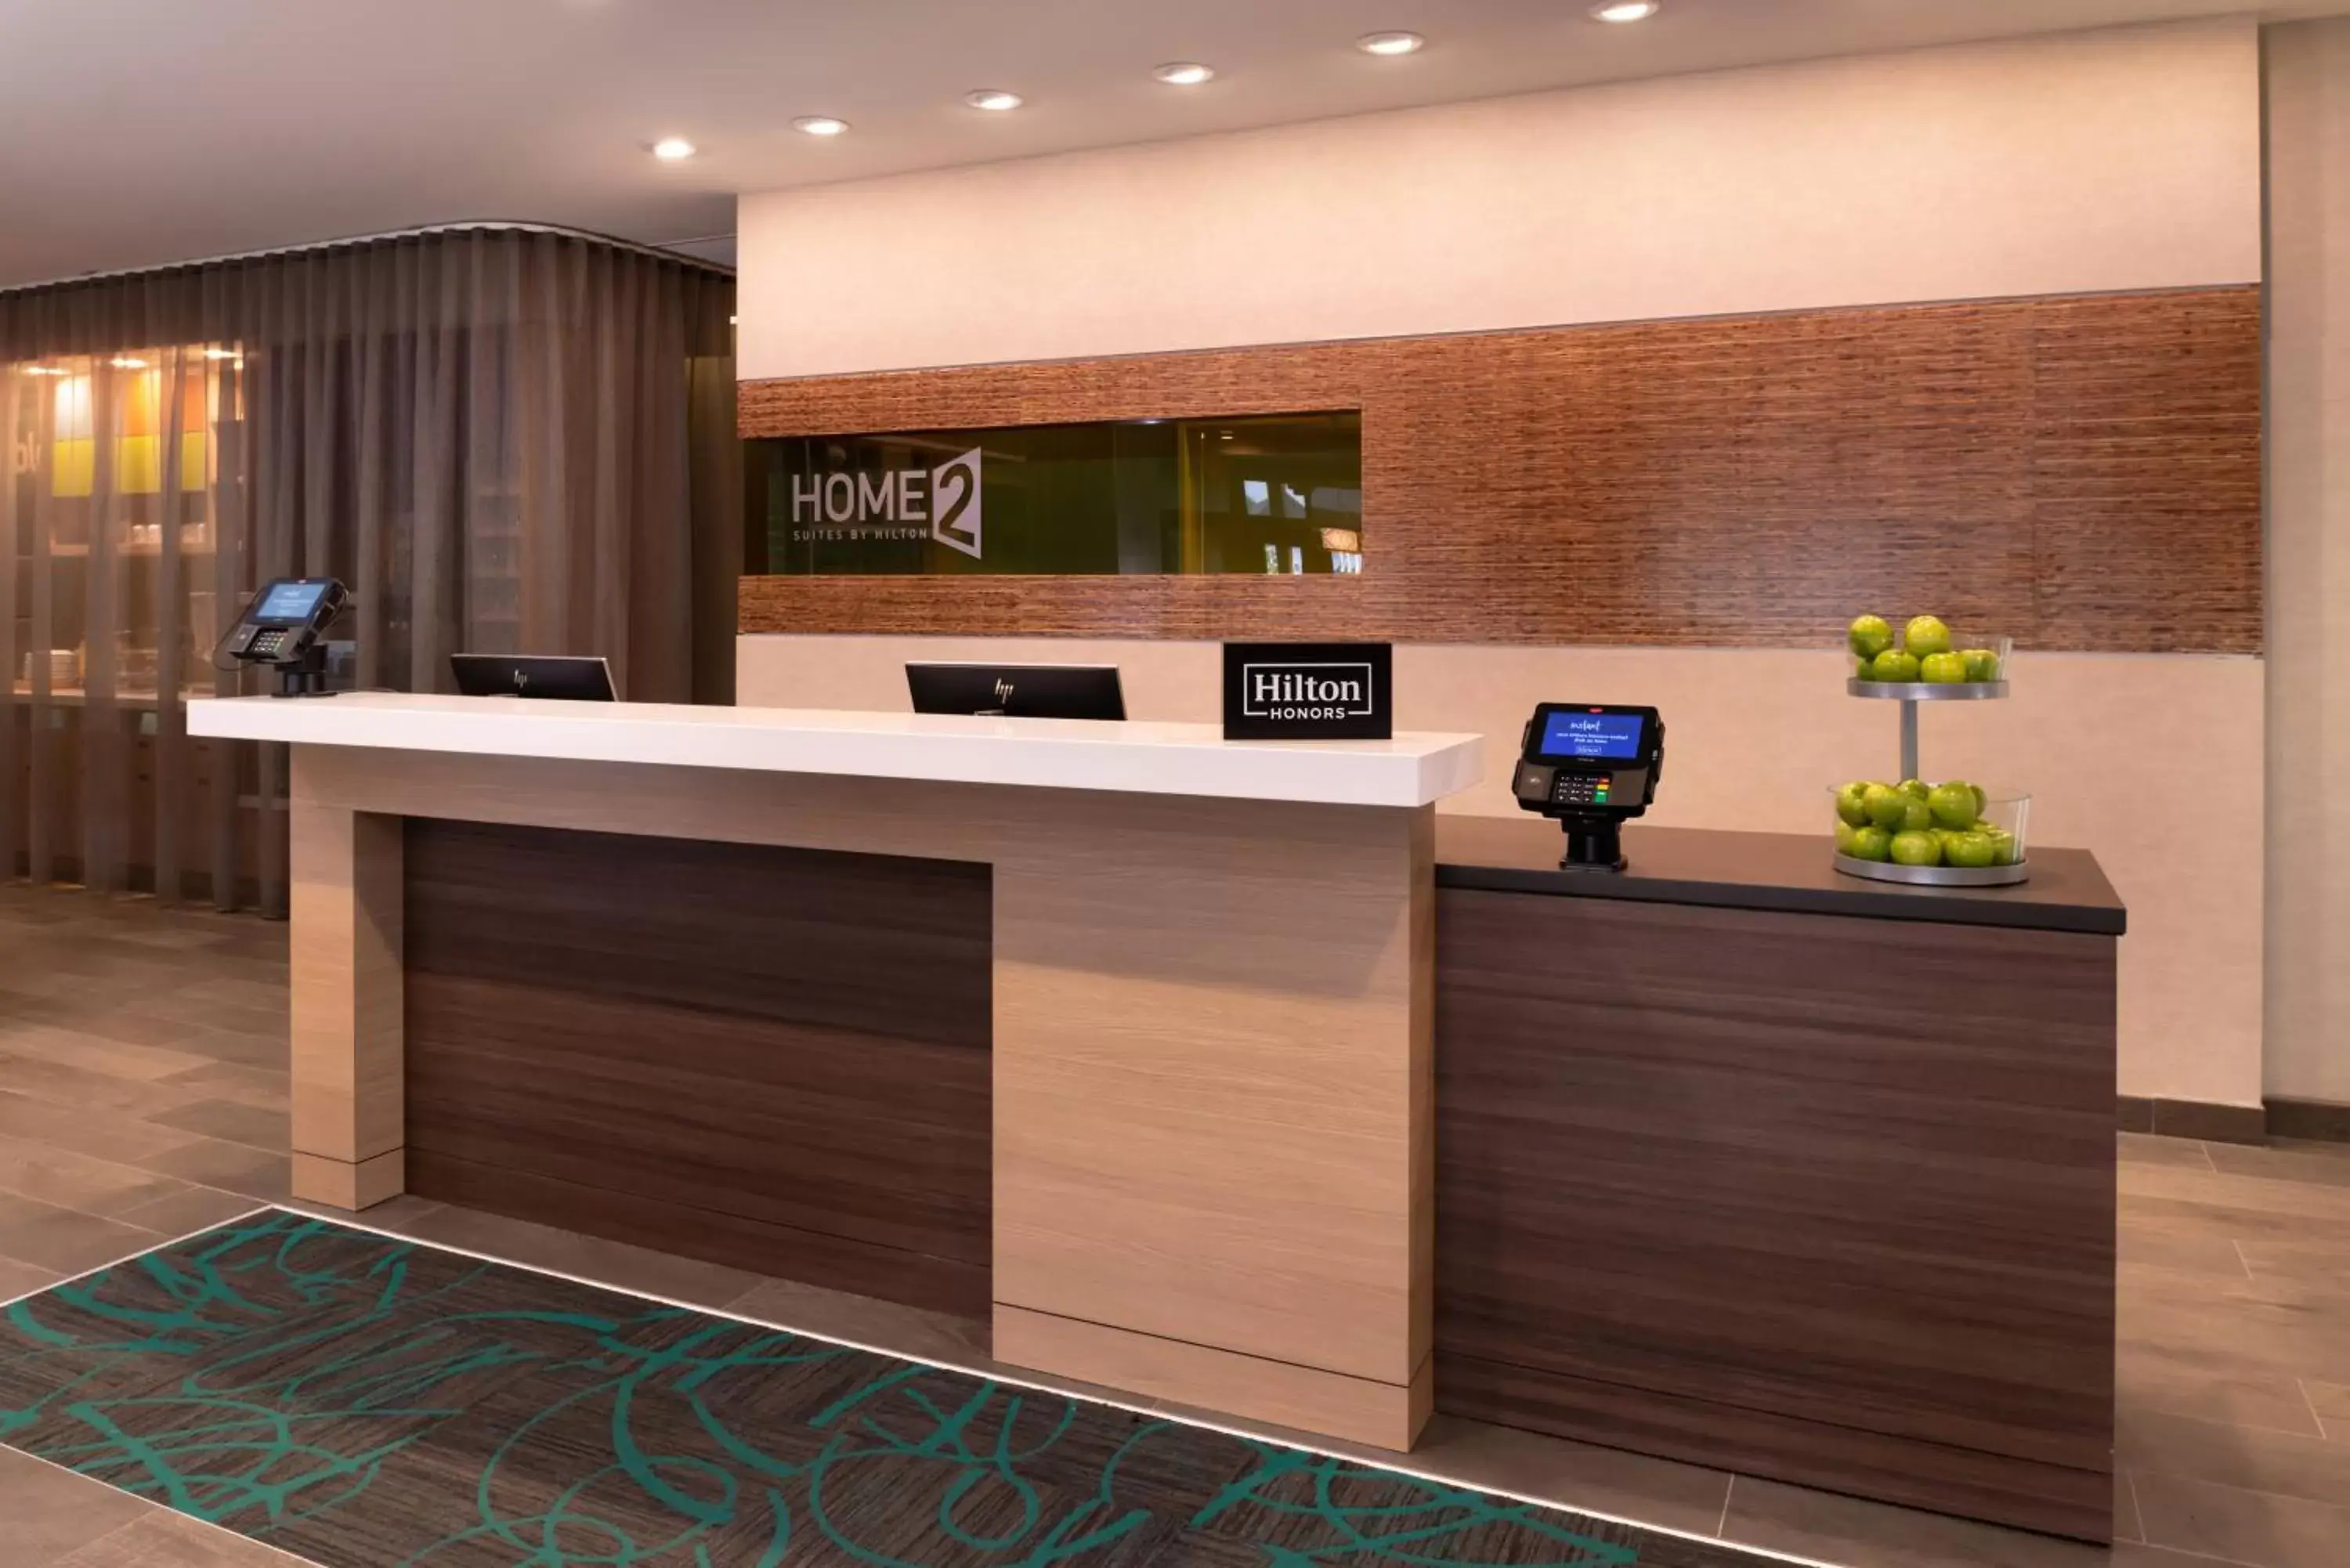 Lobby/Reception in Home2 Suites By Hilton Columbus/West, OH